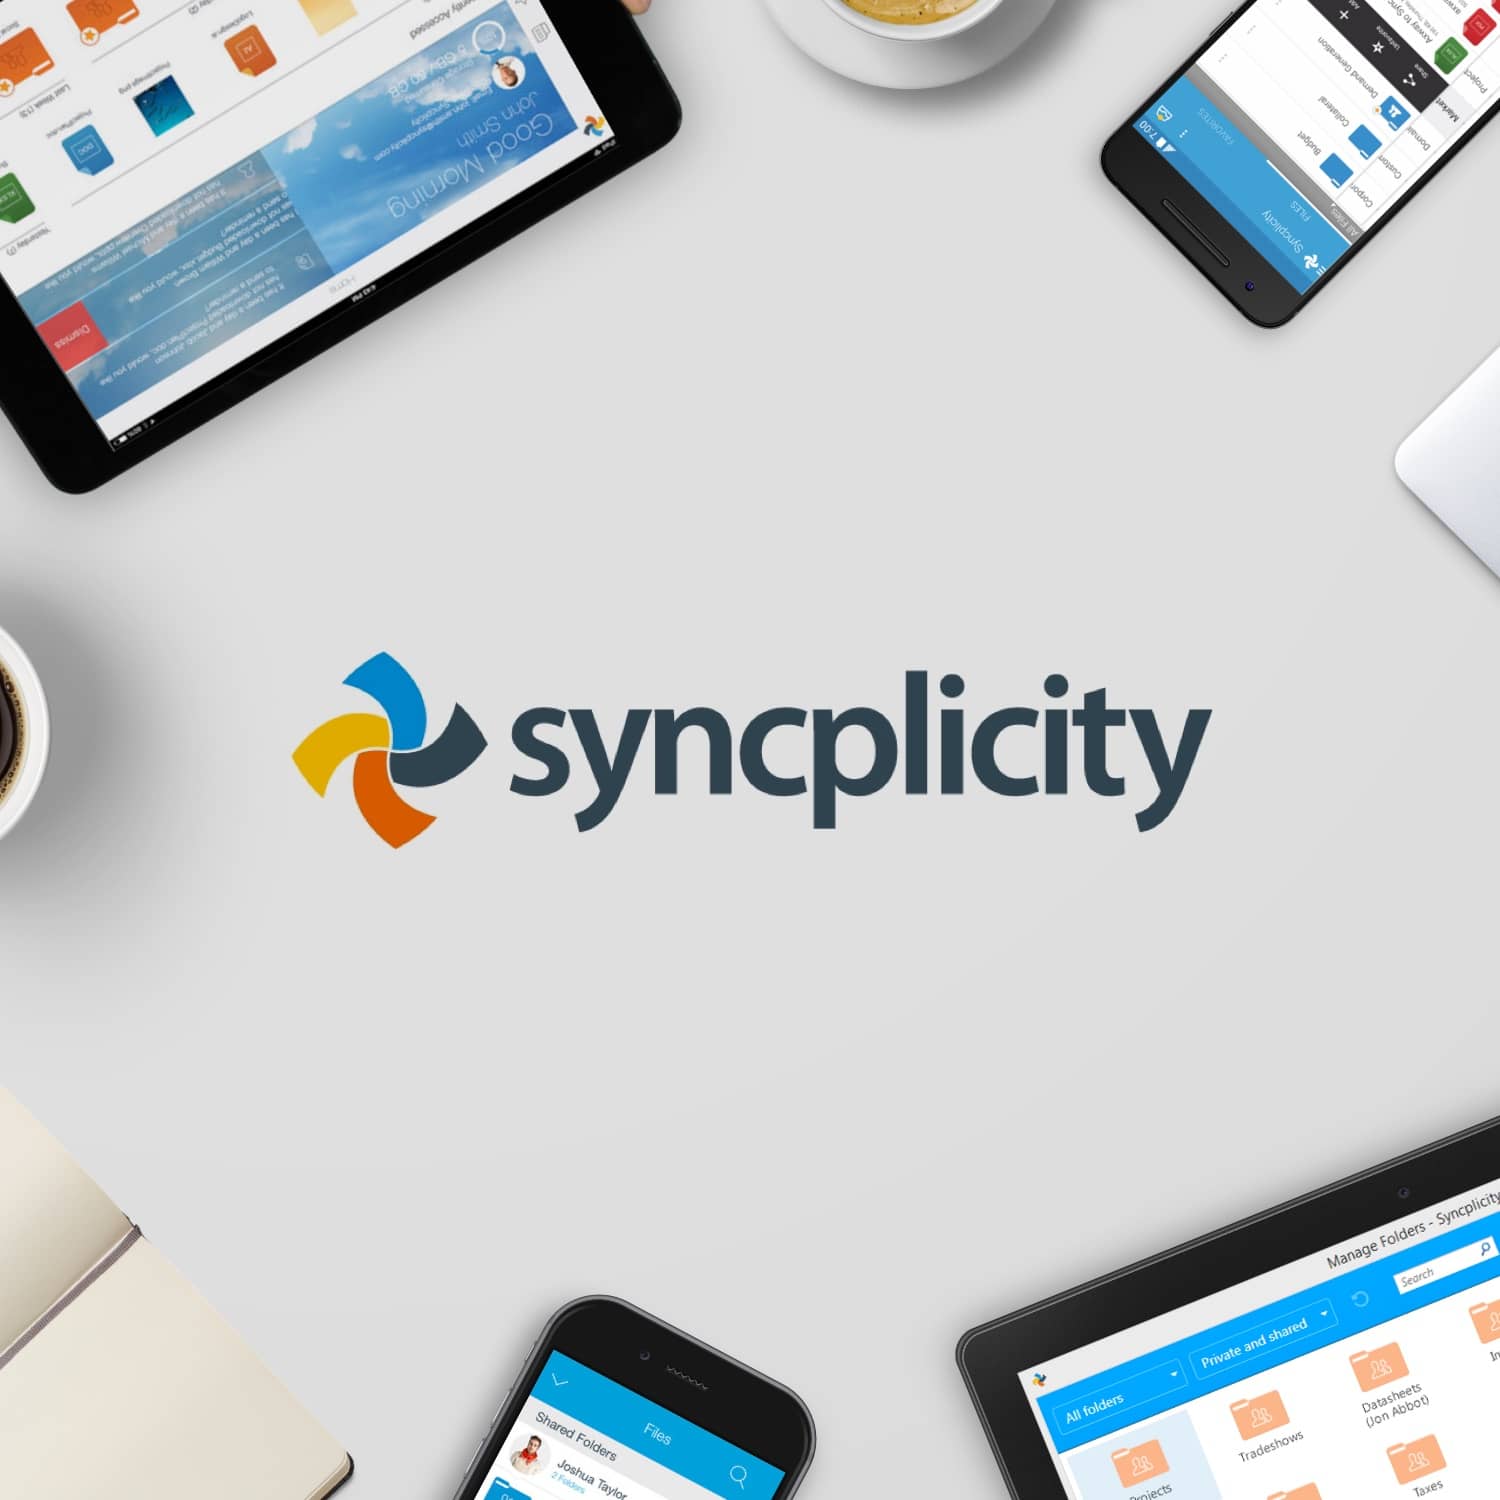 Case Study: Syncplicity